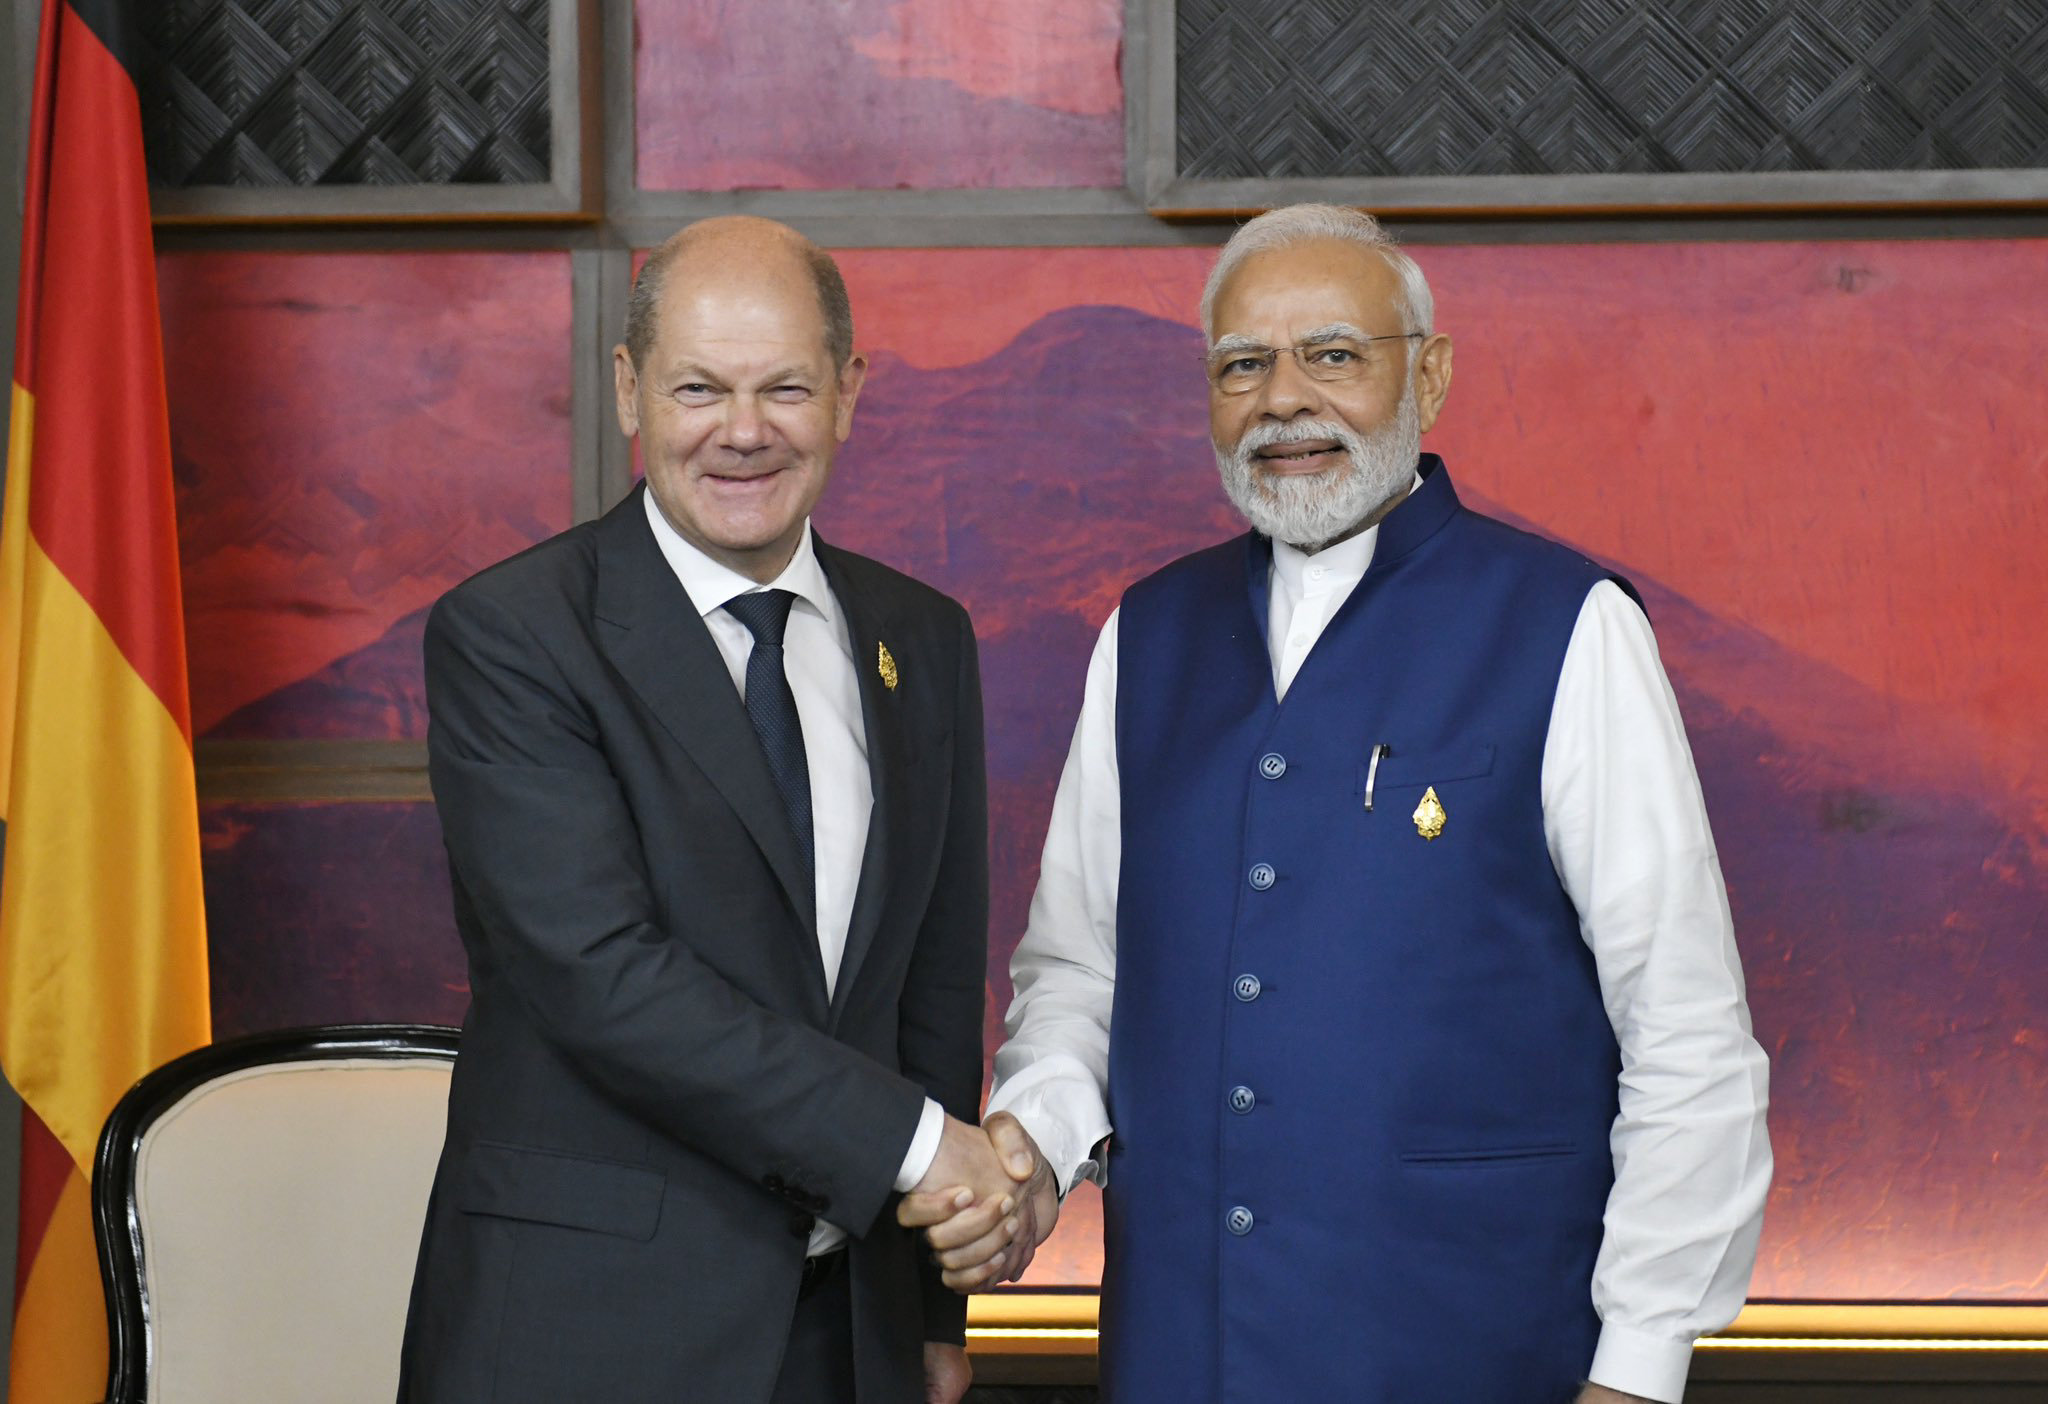 Prime Minister Modi at the 17th G20 Summit in Indonesia